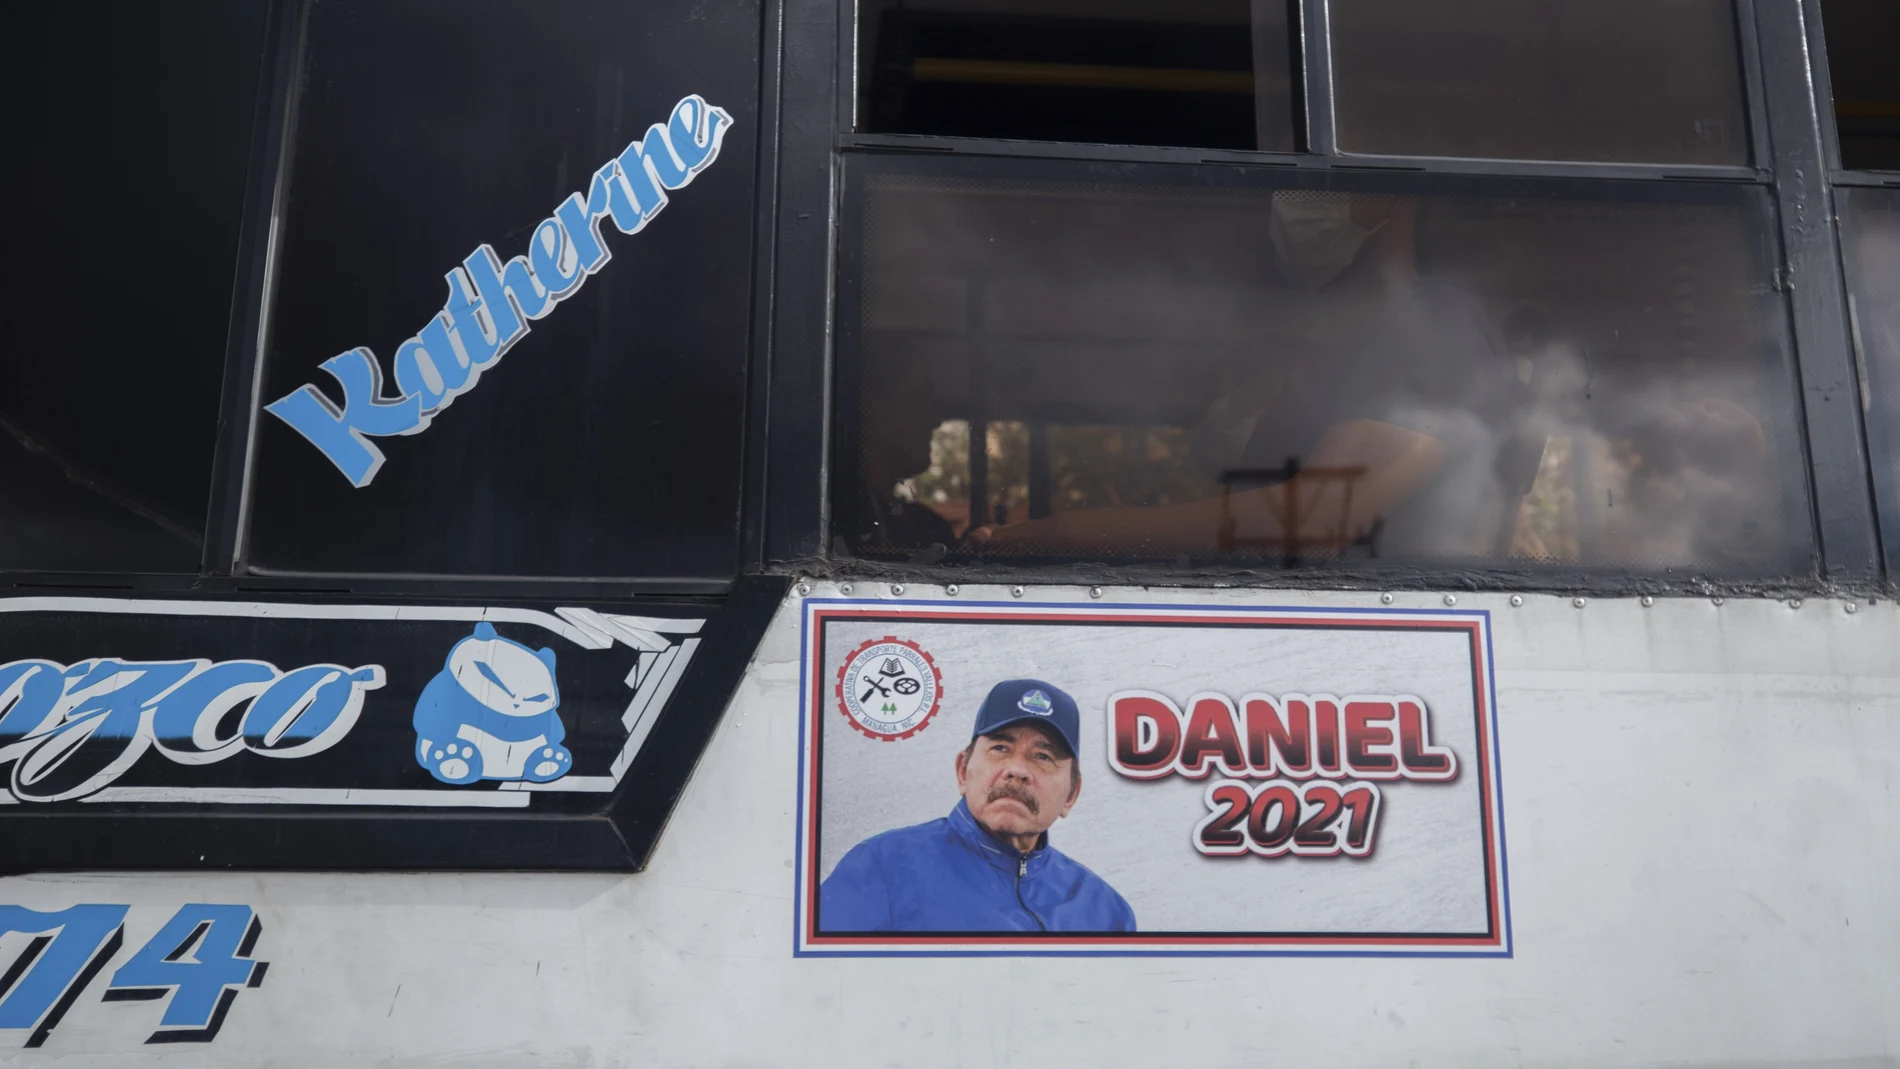 A poster promotes presidential candiate and current President Daniel Ortega on the side of a bus, in Managua, Nicaragua, Thursday, June 17, 2021. In recent weeks, Nicaragua President Daniel Ortega's government has rounded up 13 opposition leaders, including four presidential challengers for the Nov. 7 elections. They face allegations ranging from money laundering to crimes against the state. (AP Photo/Miguel Andres)